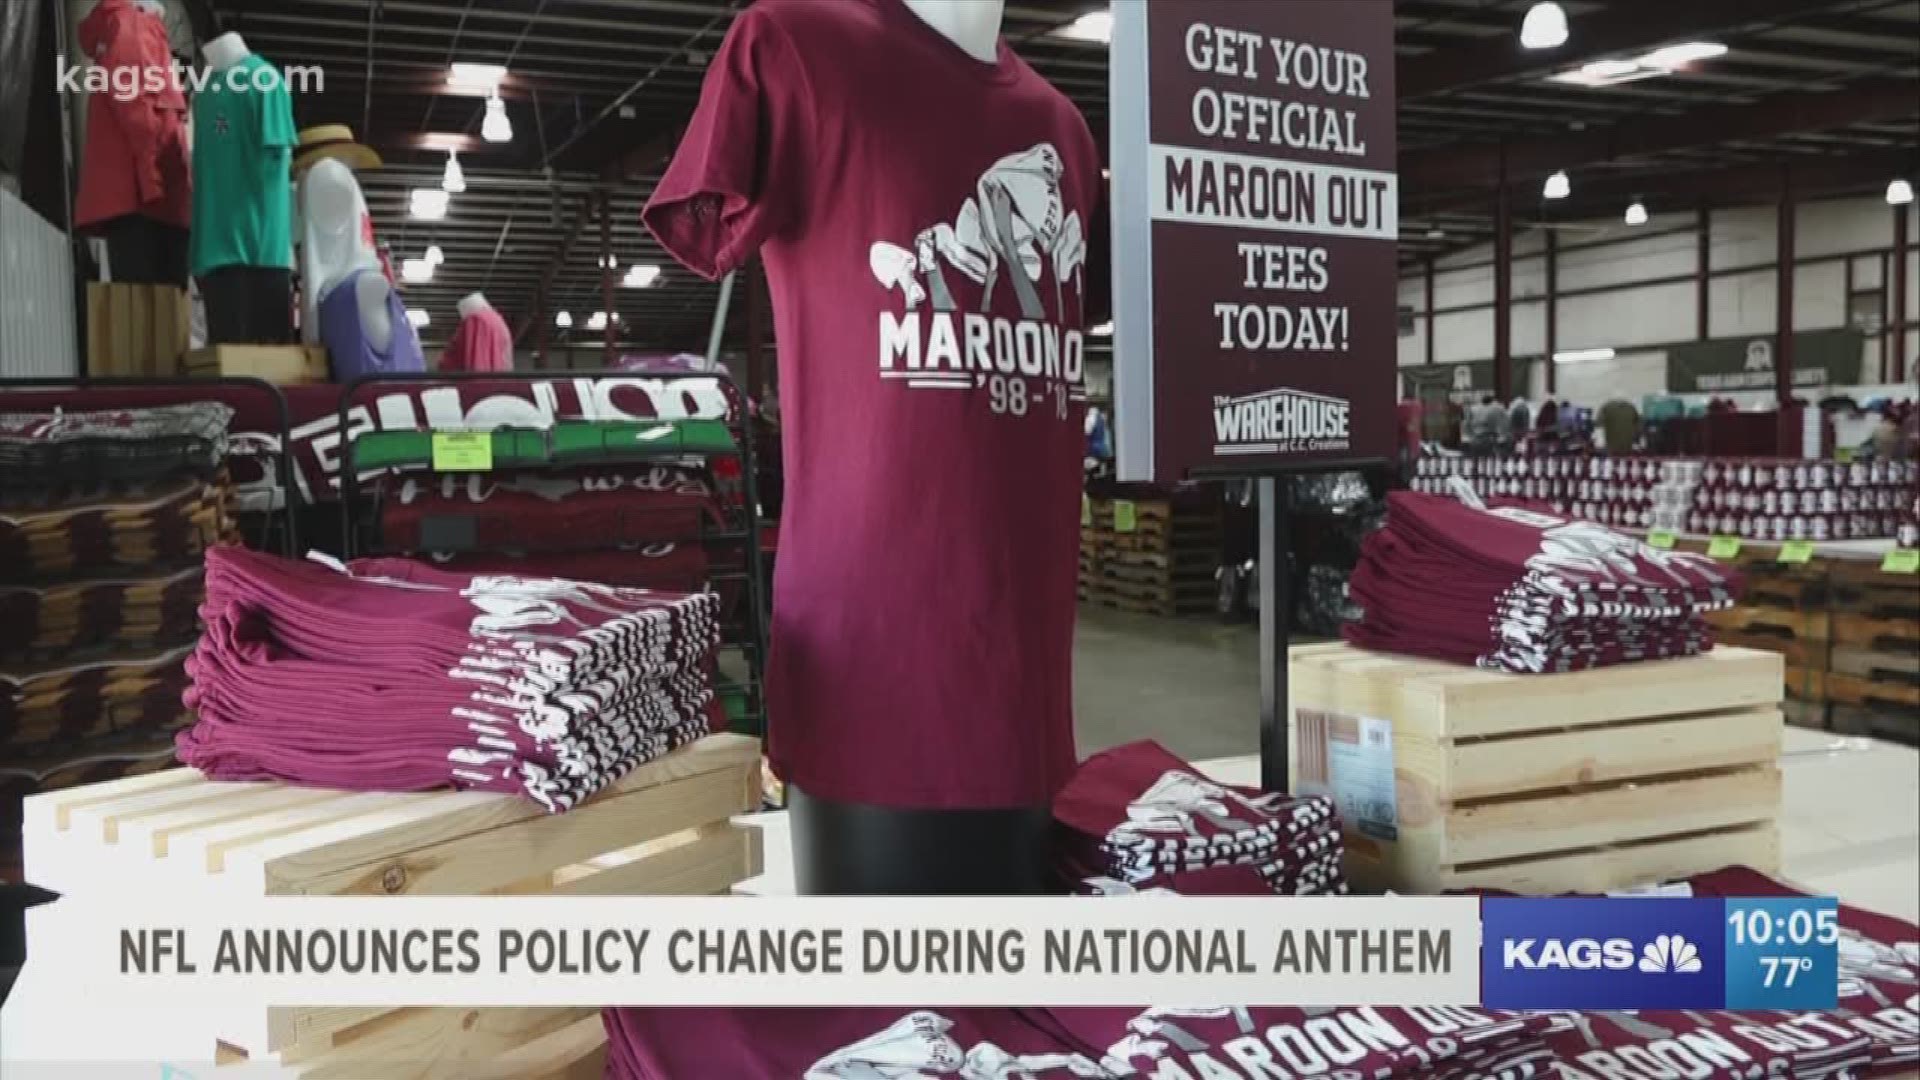 An Aggie favorite was revealed today and that would be the 2018 annual "Maroon-Out" t-shirt. This is the 21st year for the traditional Aggie shirt.